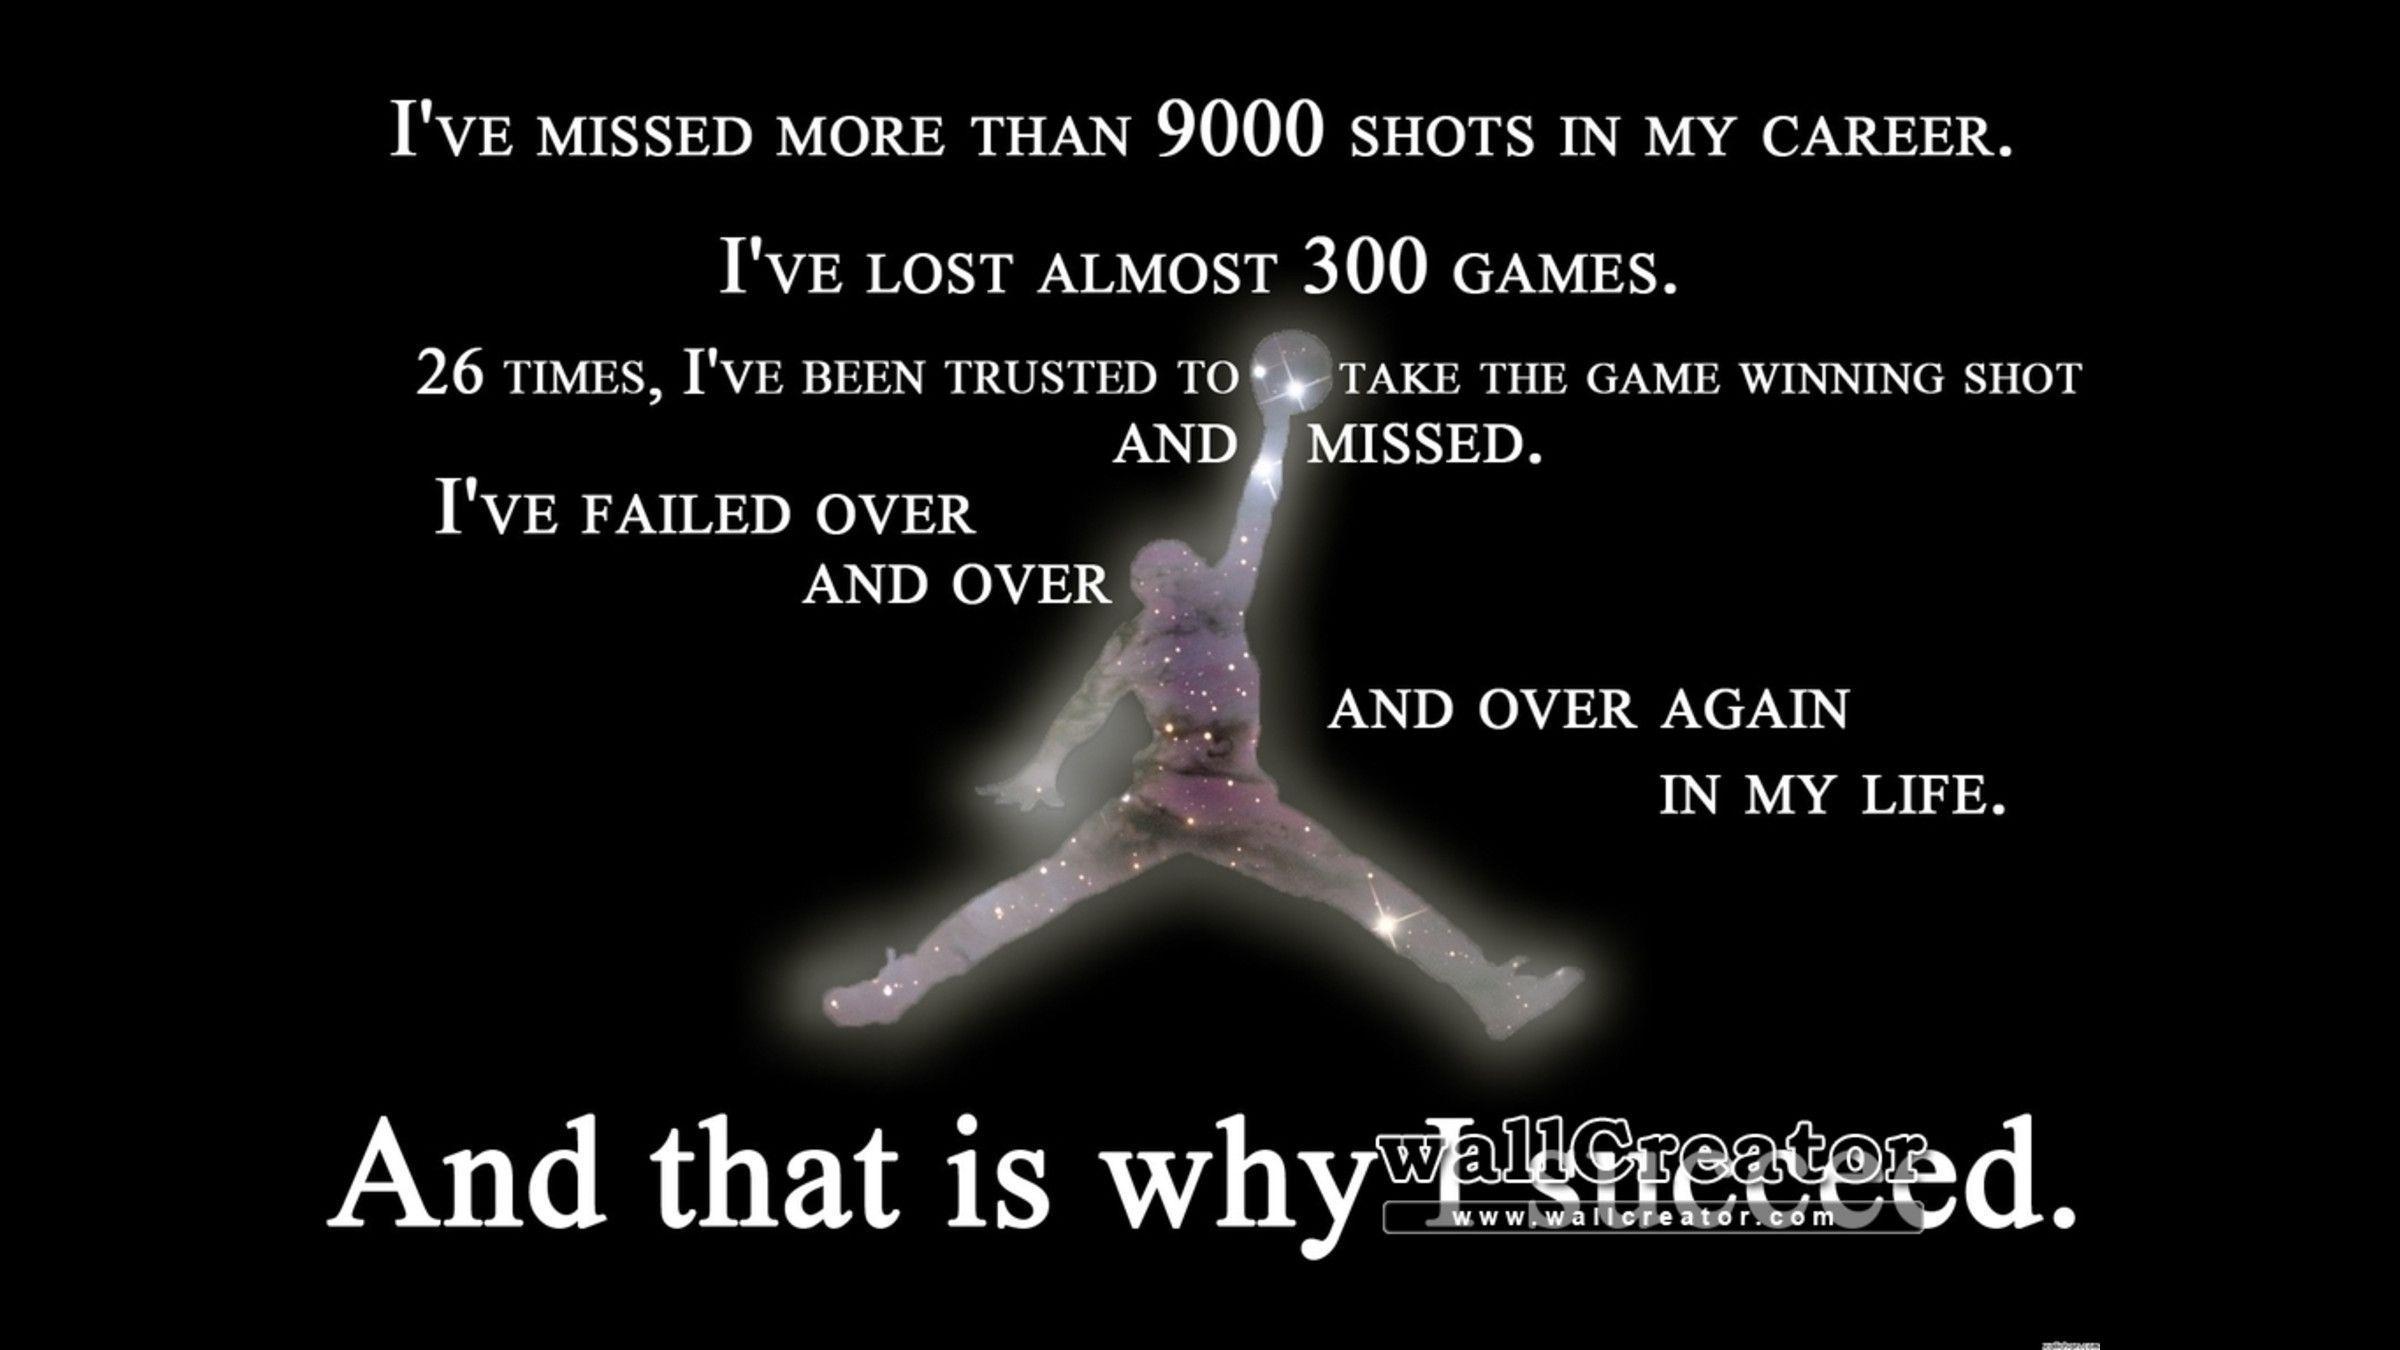 Michael Jordan Quote Picture from our First page